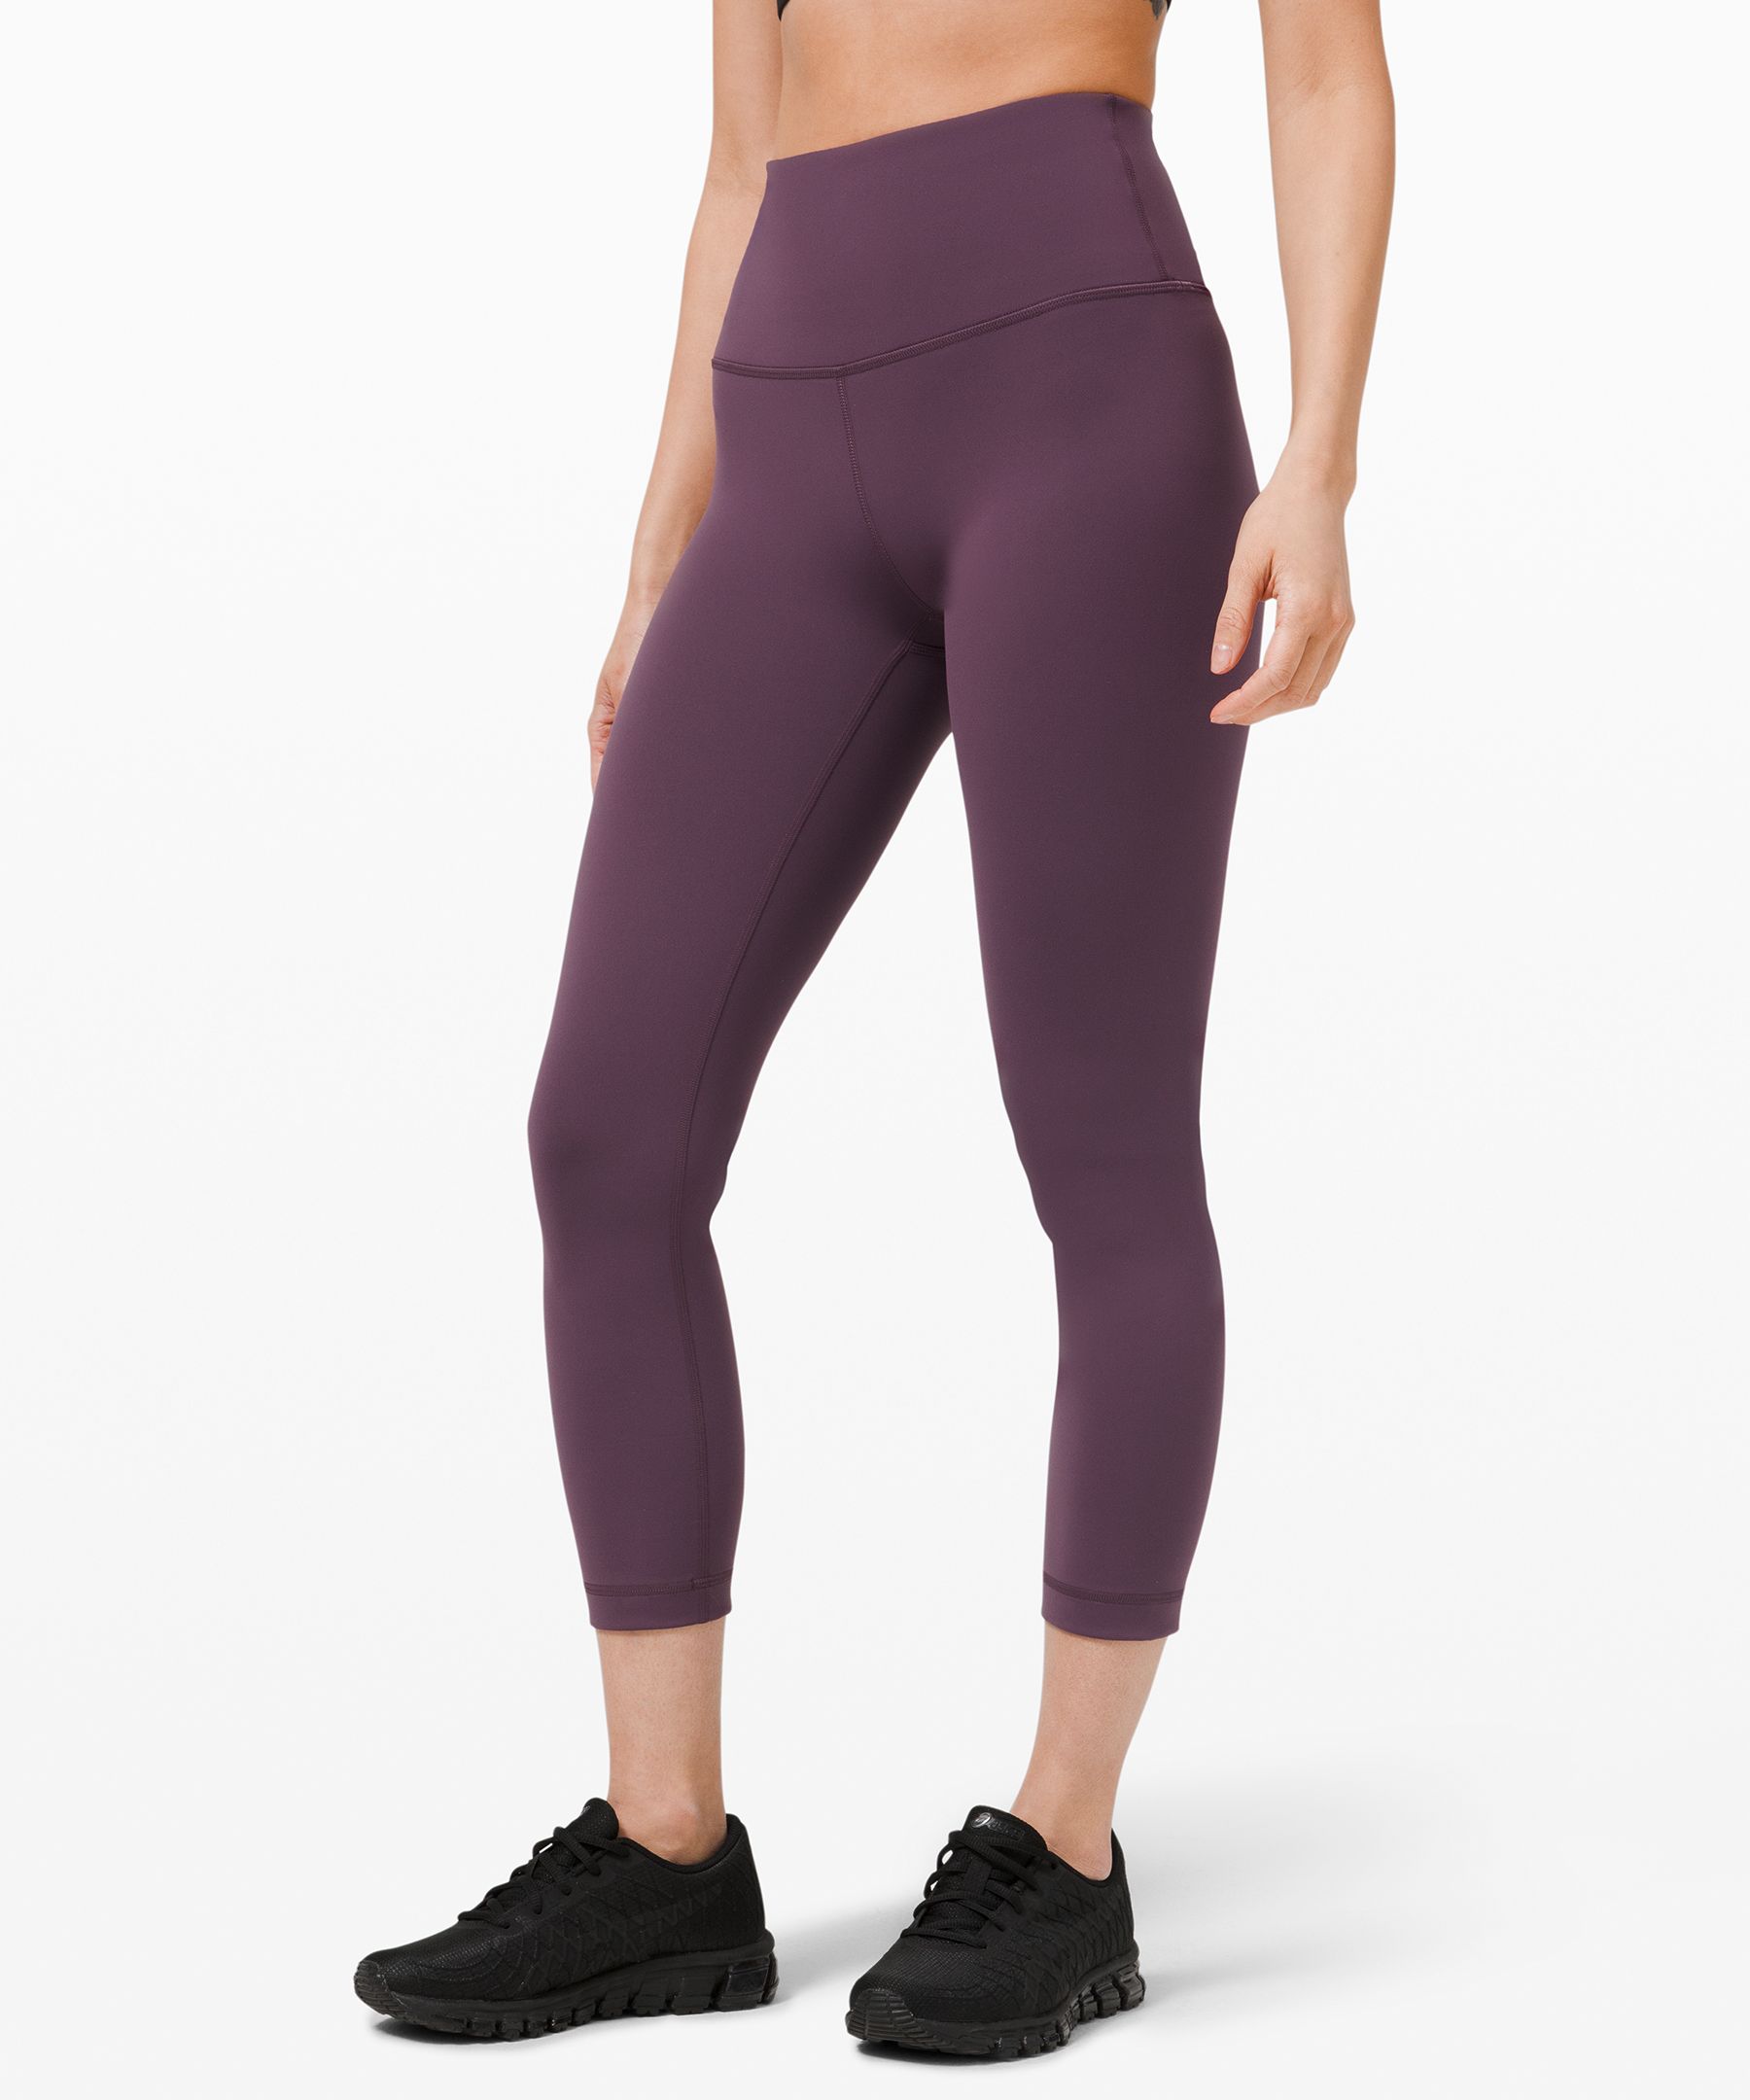 Lululemon Athletica Wunder Train Hi-Rise Tight 25 inch (Black Camo, 4) at   Women's Clothing store